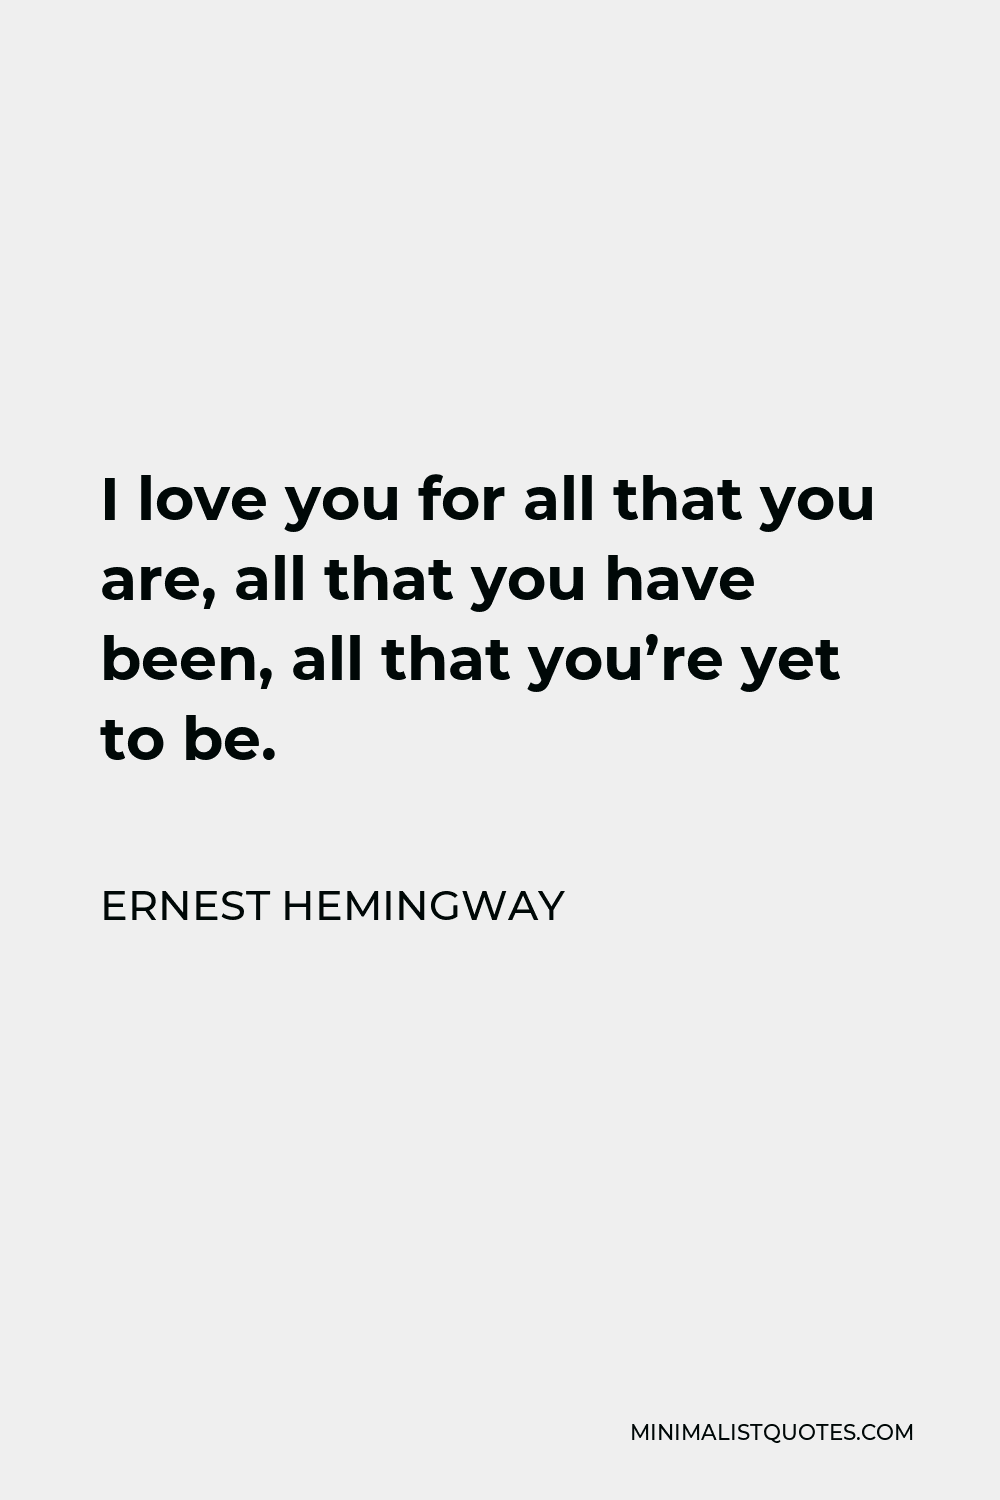 Ernest Hemingway Quote - I love you for all that you are, all that you have been, all that you’re yet to be.